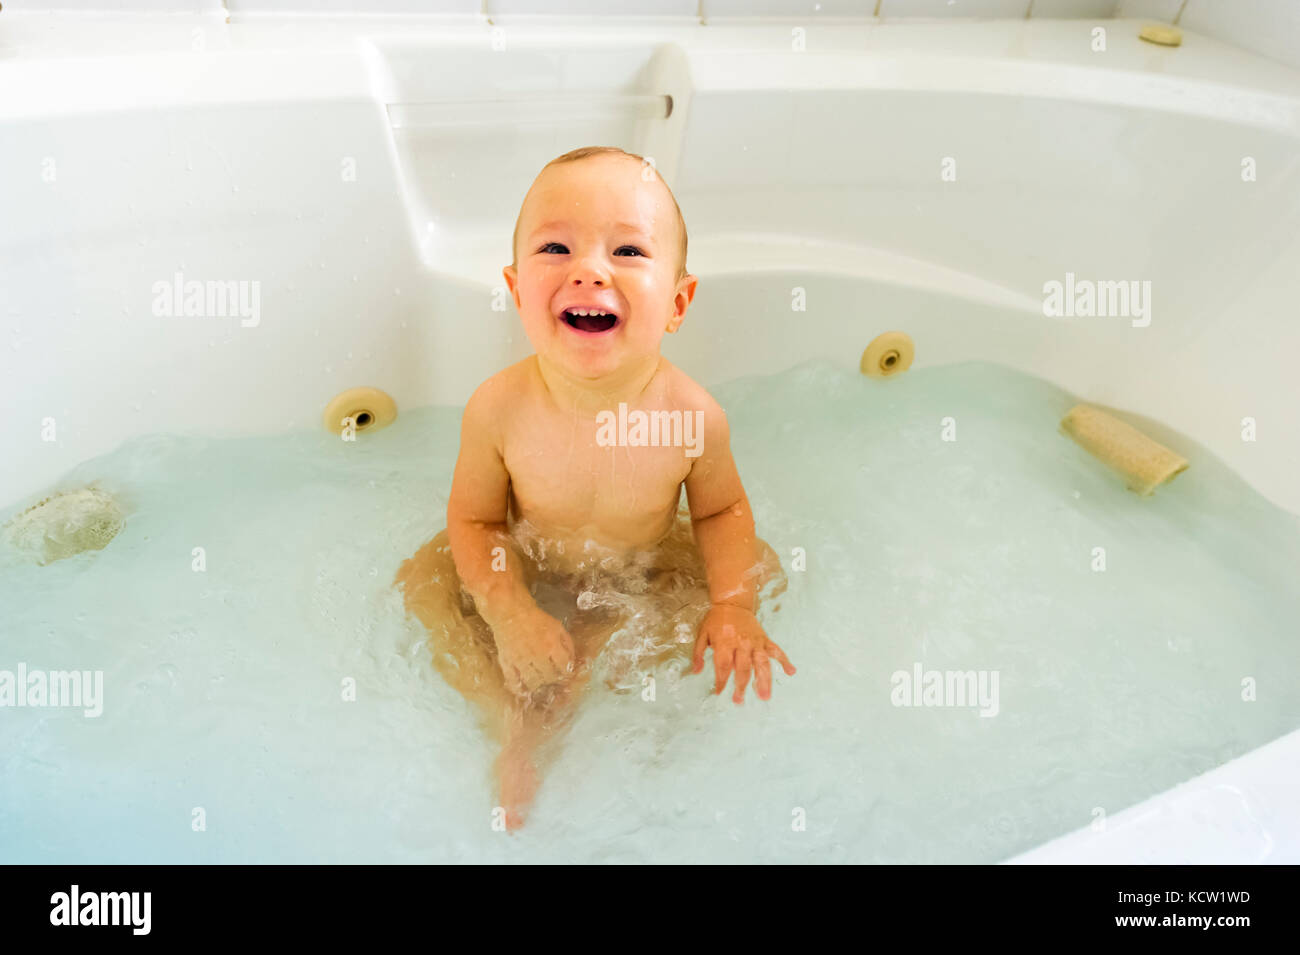 9-months old boy playing in a bath tub Stock Photo